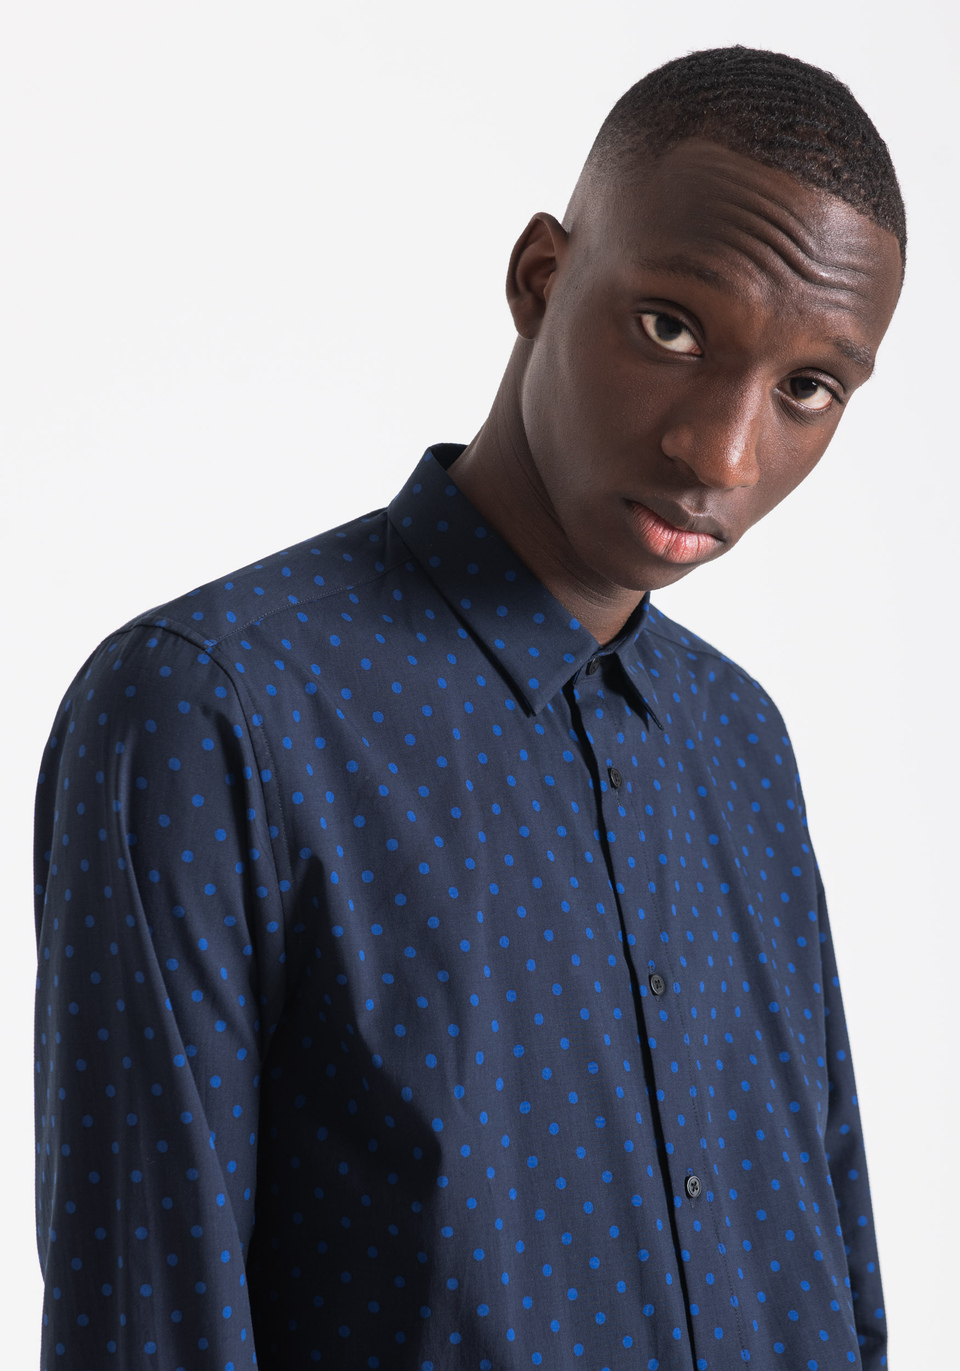 STRAIGHT FIT SHIRT IN COTTON BLEND WITH POLKA DOT PRINT - Antony Morato Online Shop